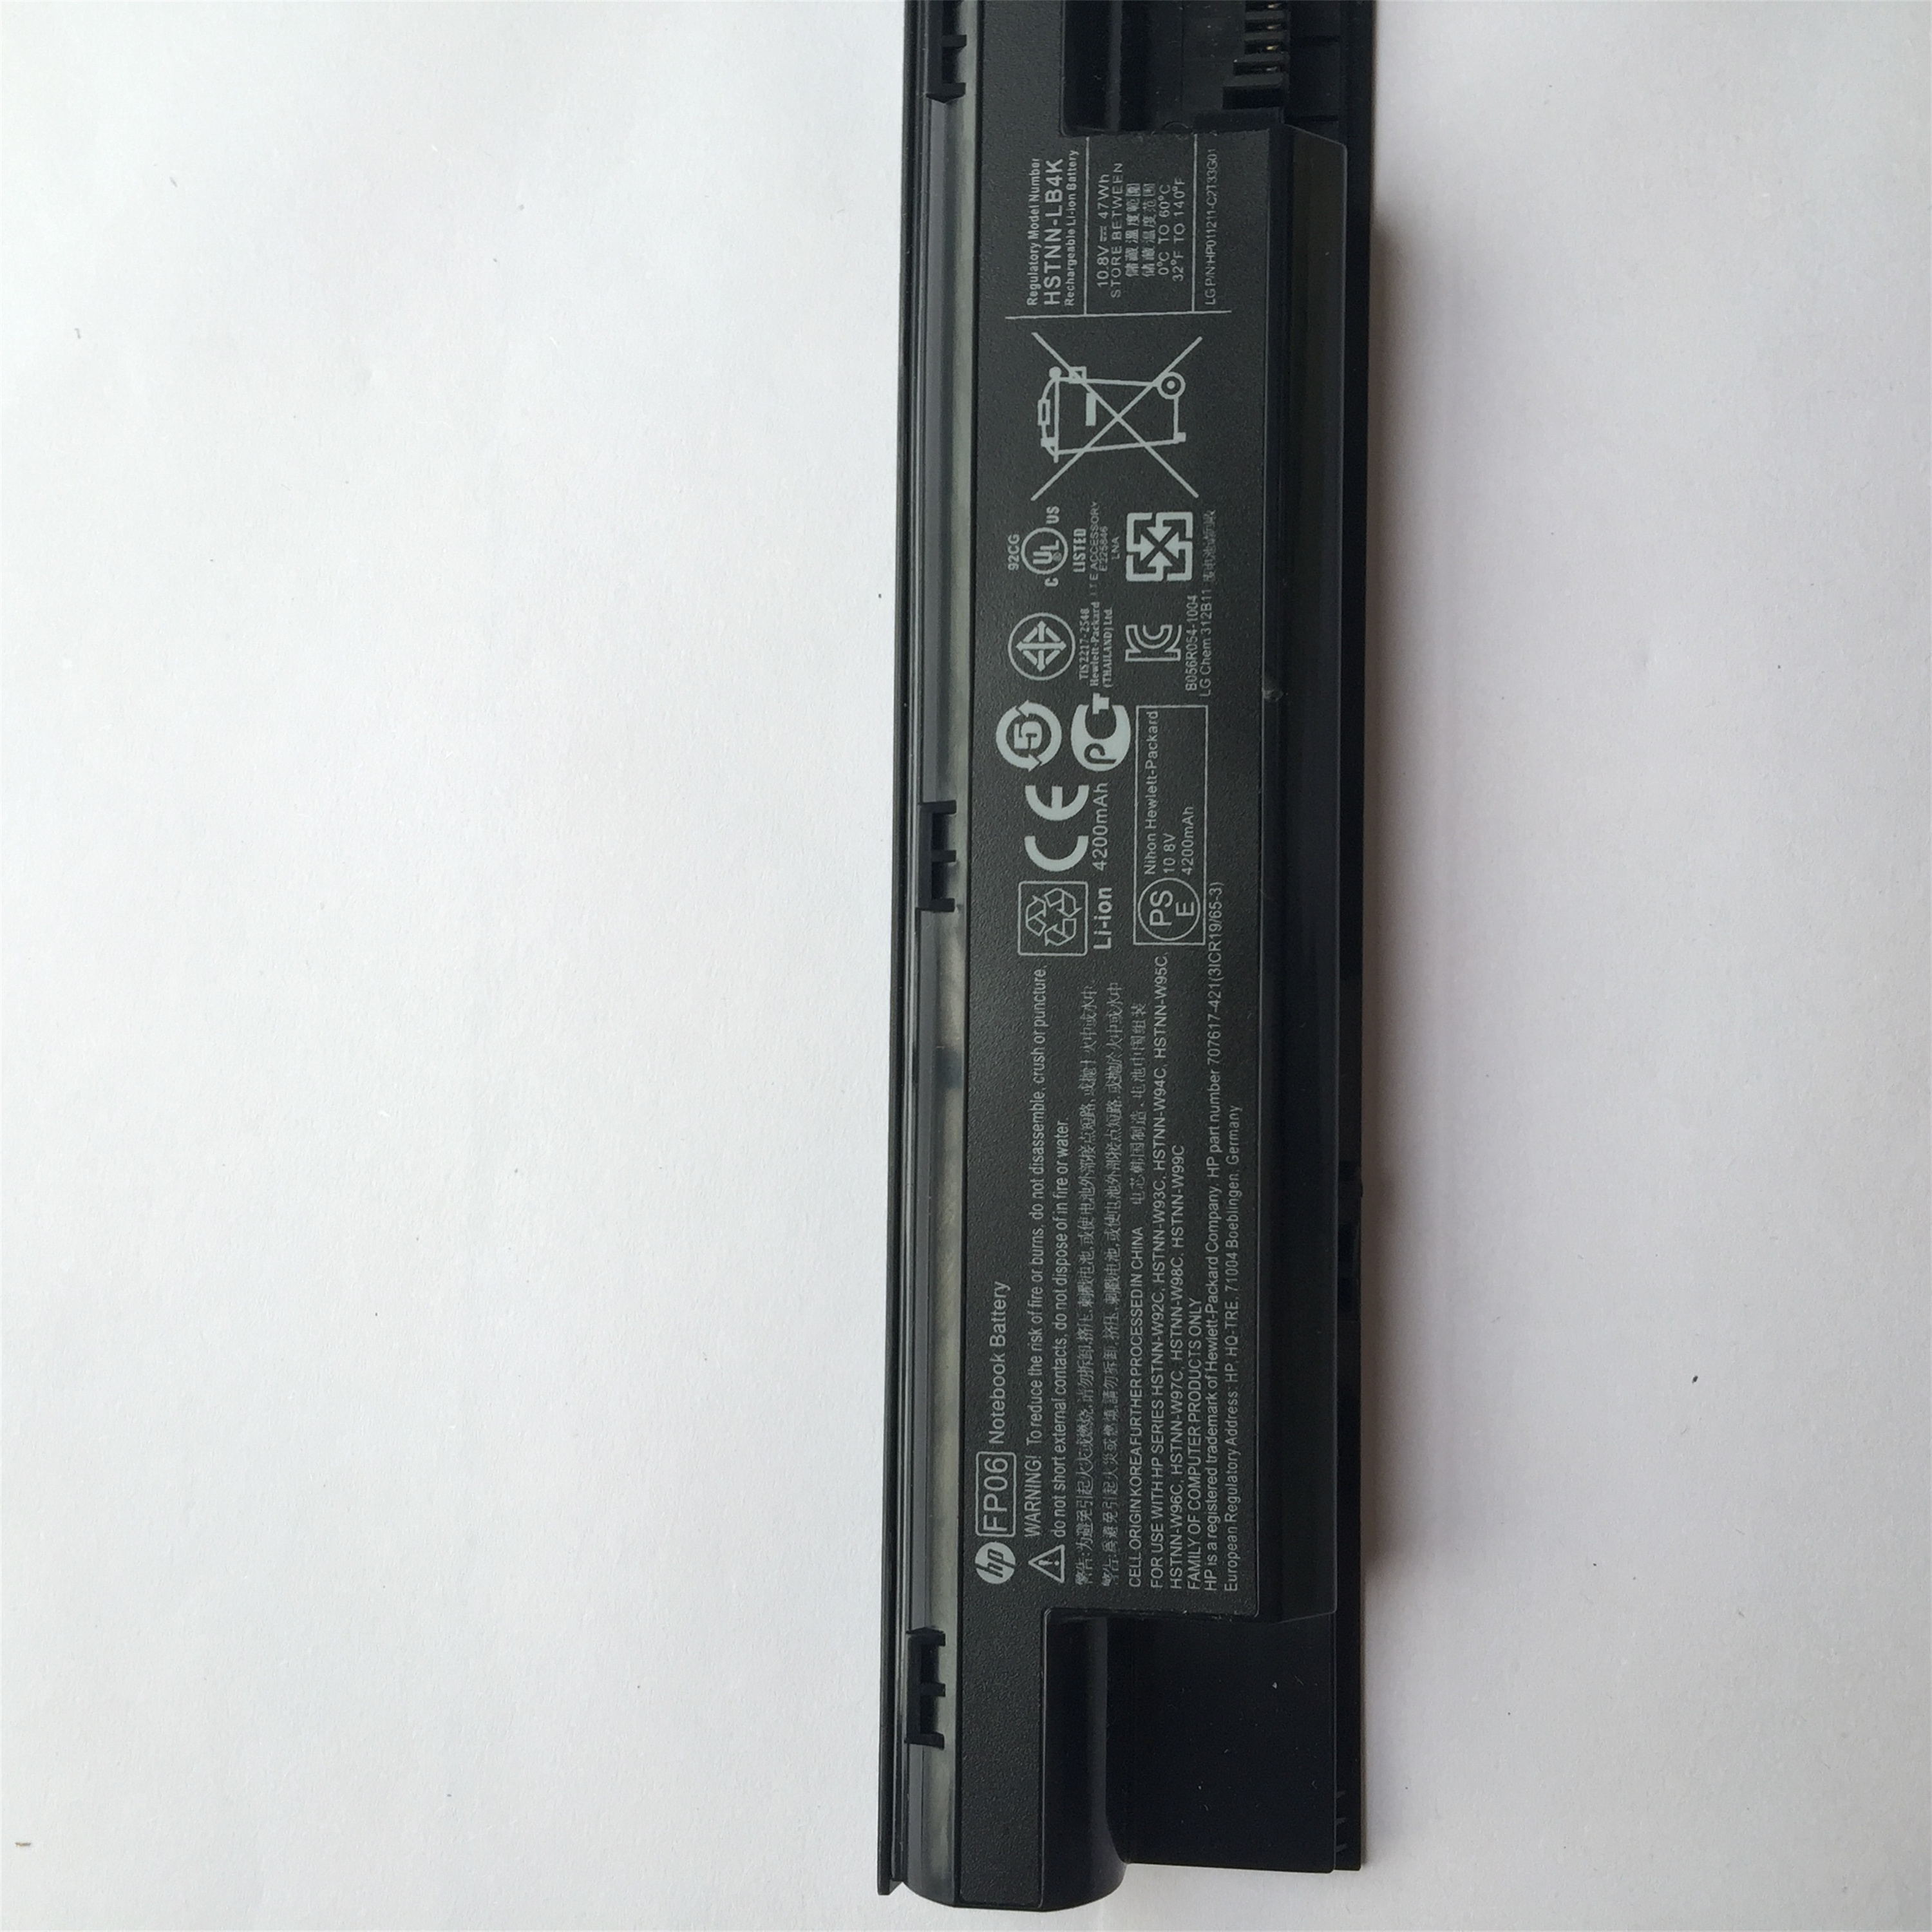 FP06 rechargeable lithium ion Notebook battery Laptop battery For HP ProBook 440 445 450 455 470 G0 G1 708458-001 708457-001 10.8V 47Wh